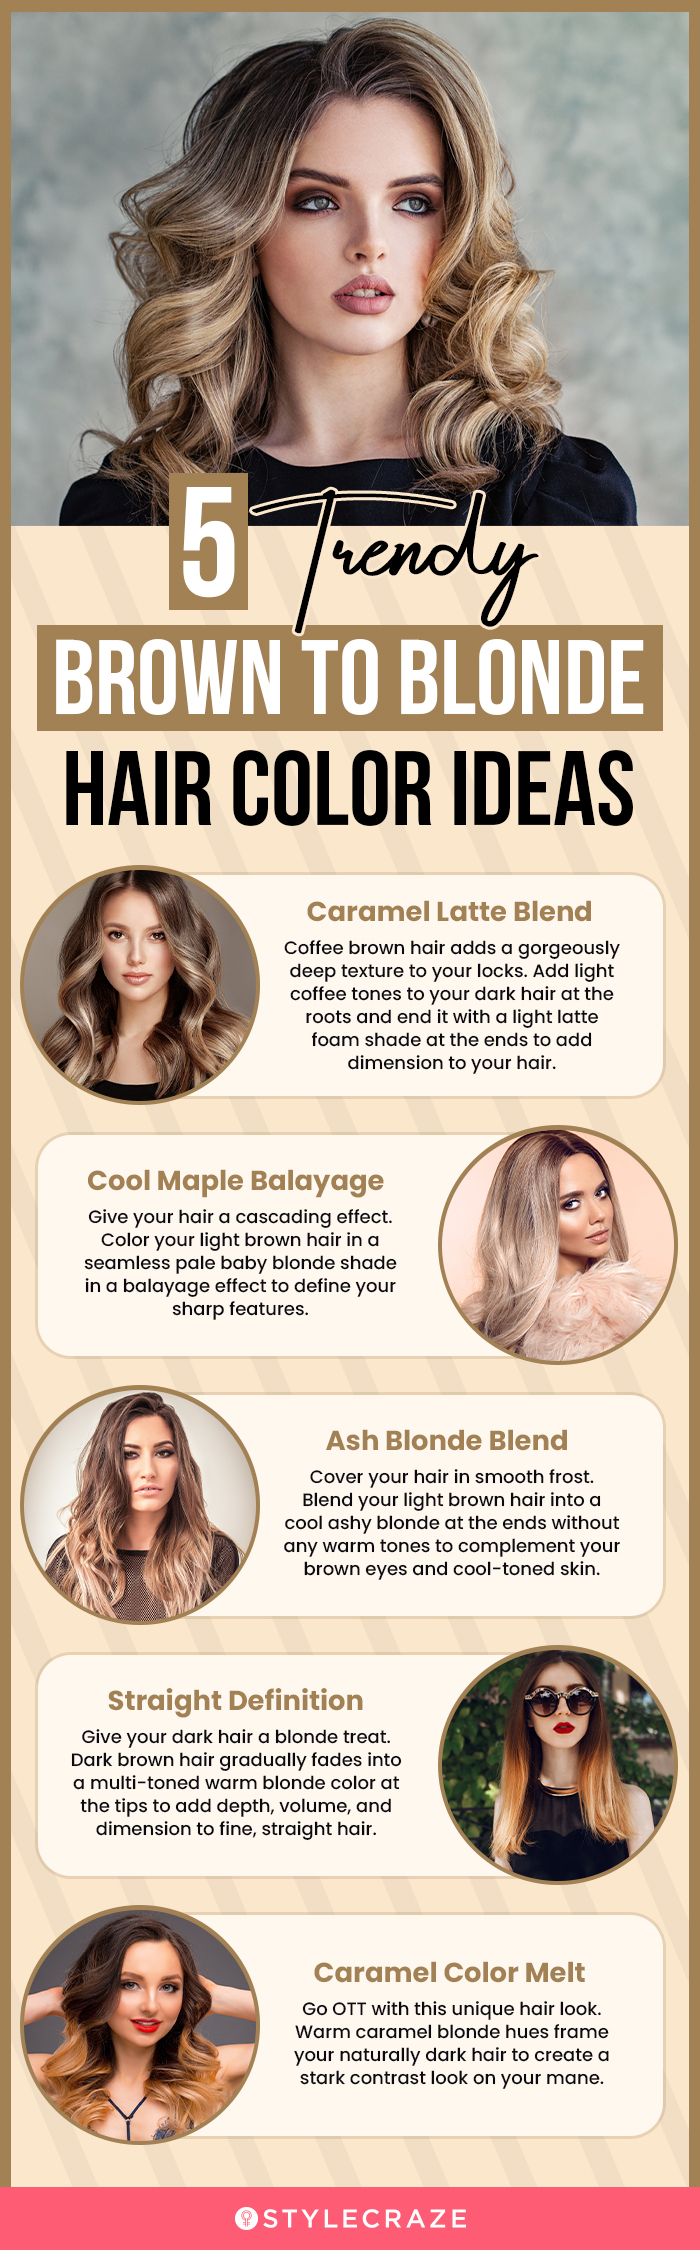 5 trendy brown to blonde hair color ideas (infographic)